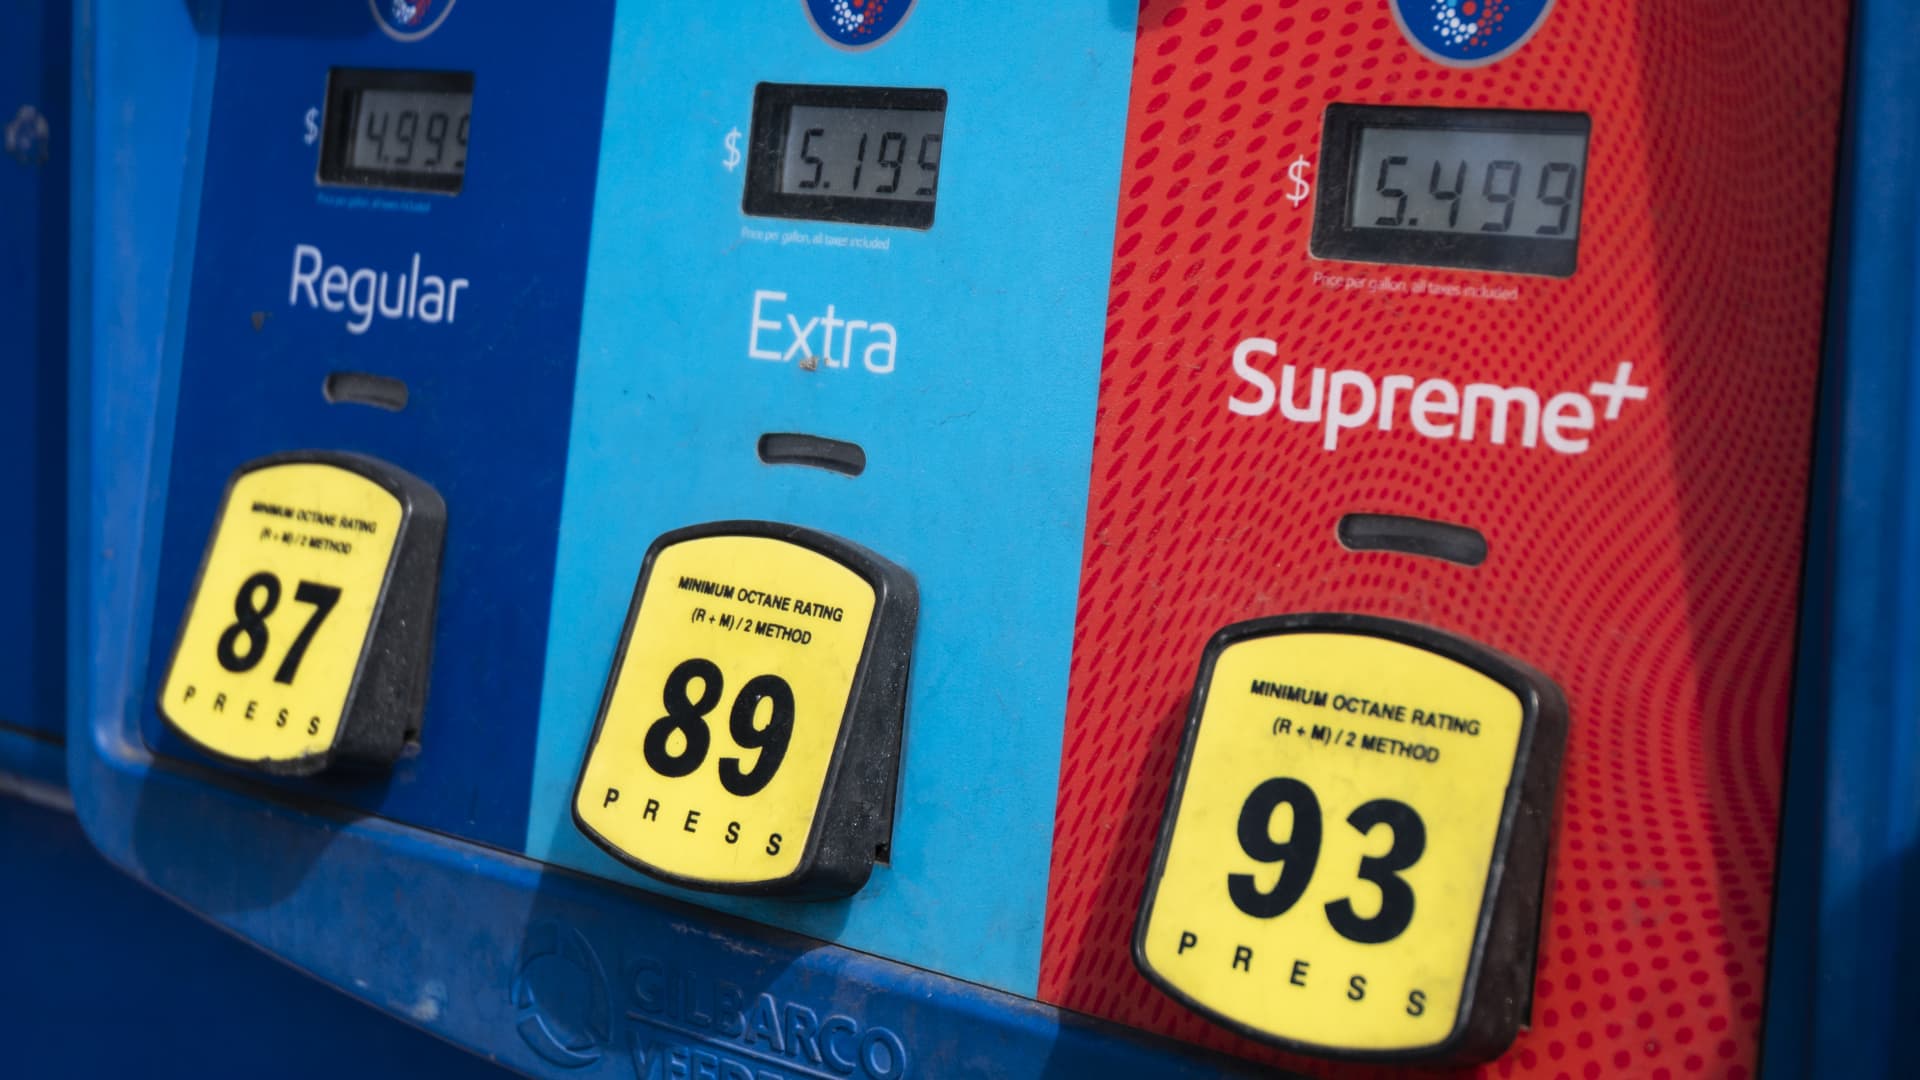 Gas prices are displayed on a gas pump at an Exxon station in Washington on Tuesday, March 8, 2022.